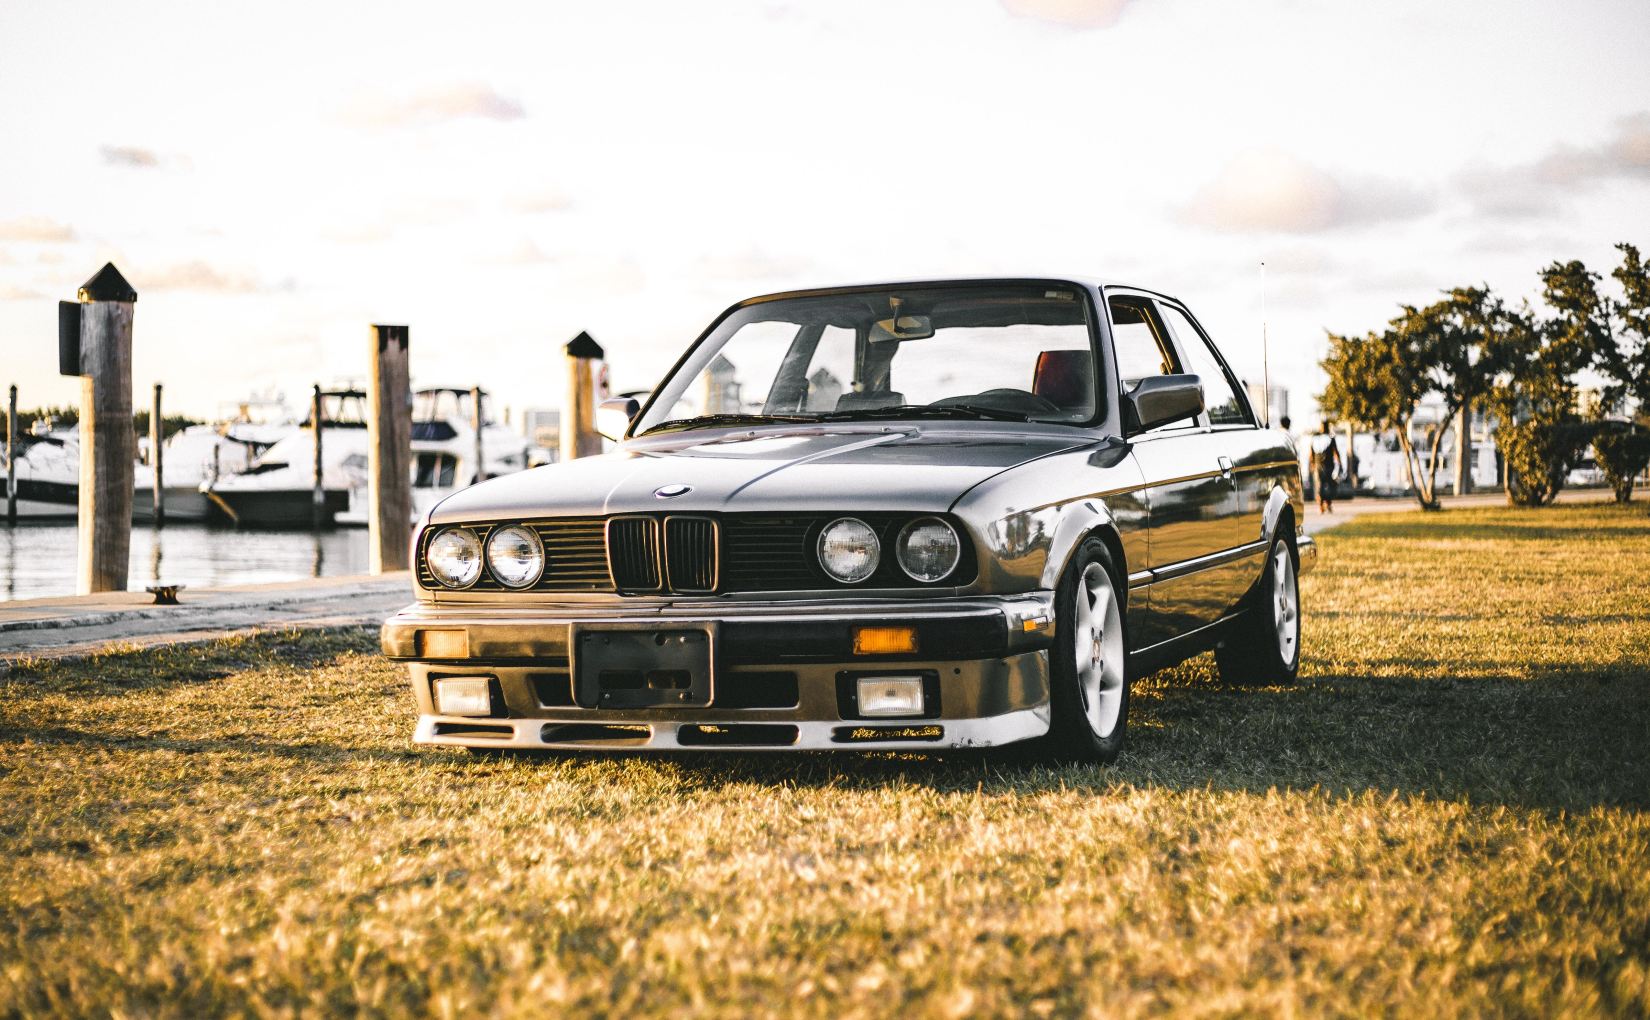 BMW 325is on Grass at a Marina